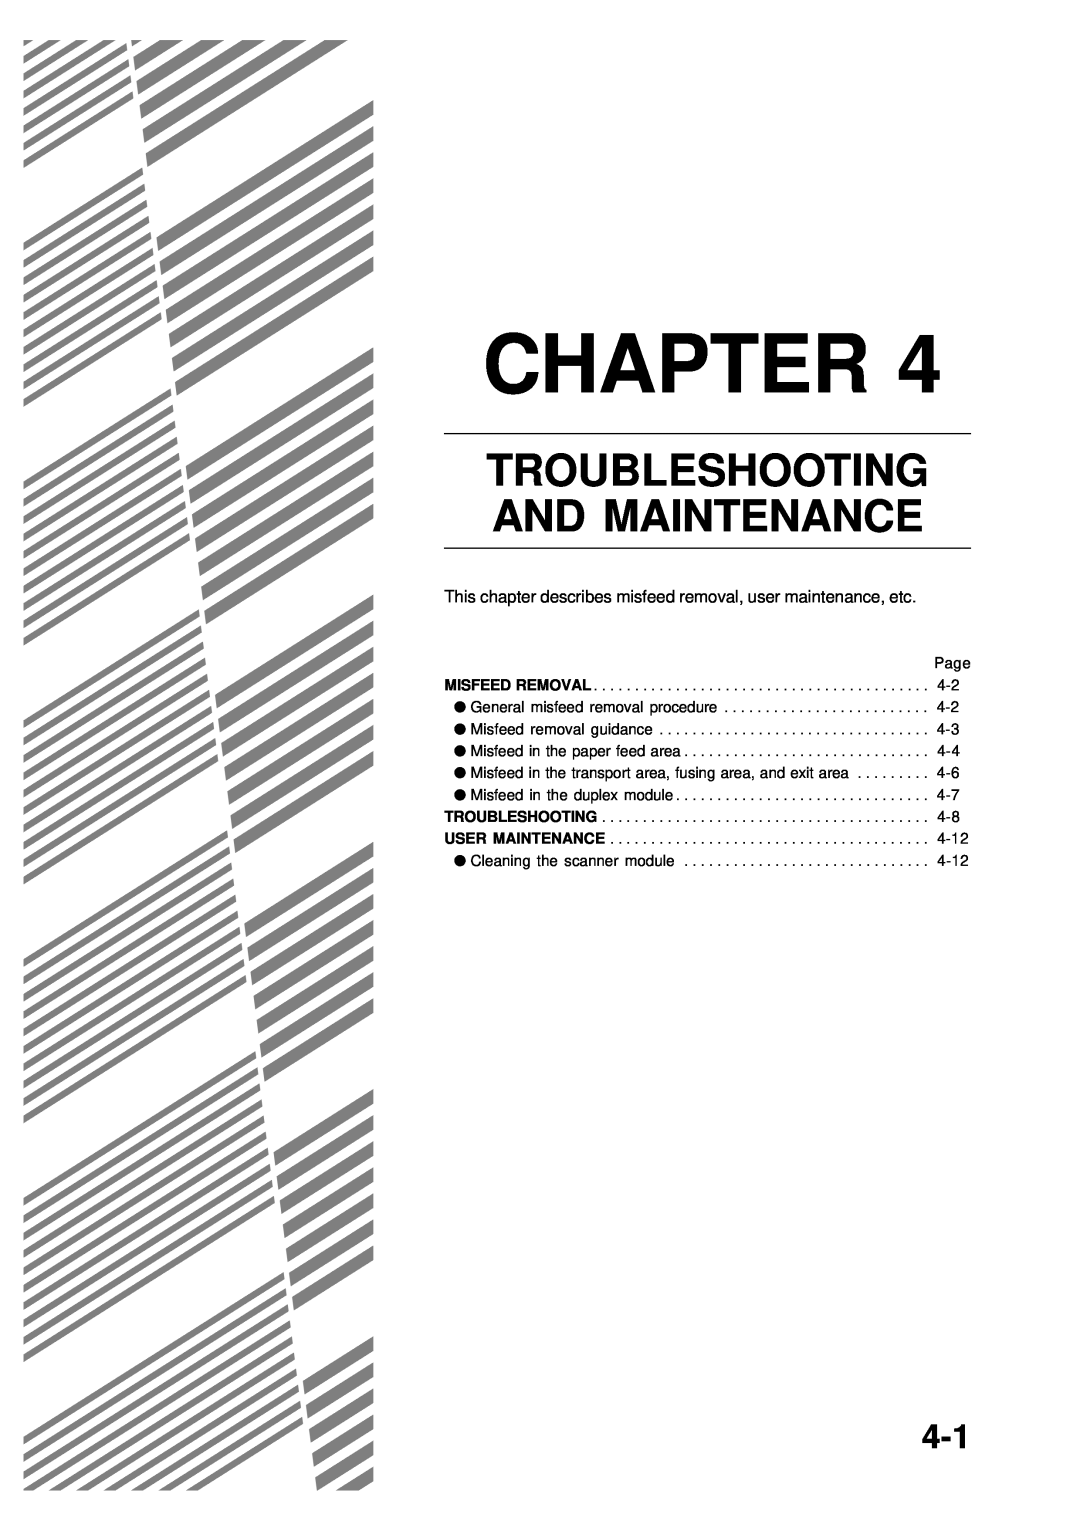 Sharp AR-350 Troubleshooting And Maintenance, Chapter, This chapter describes misfeed removal, user maintenance, etc 